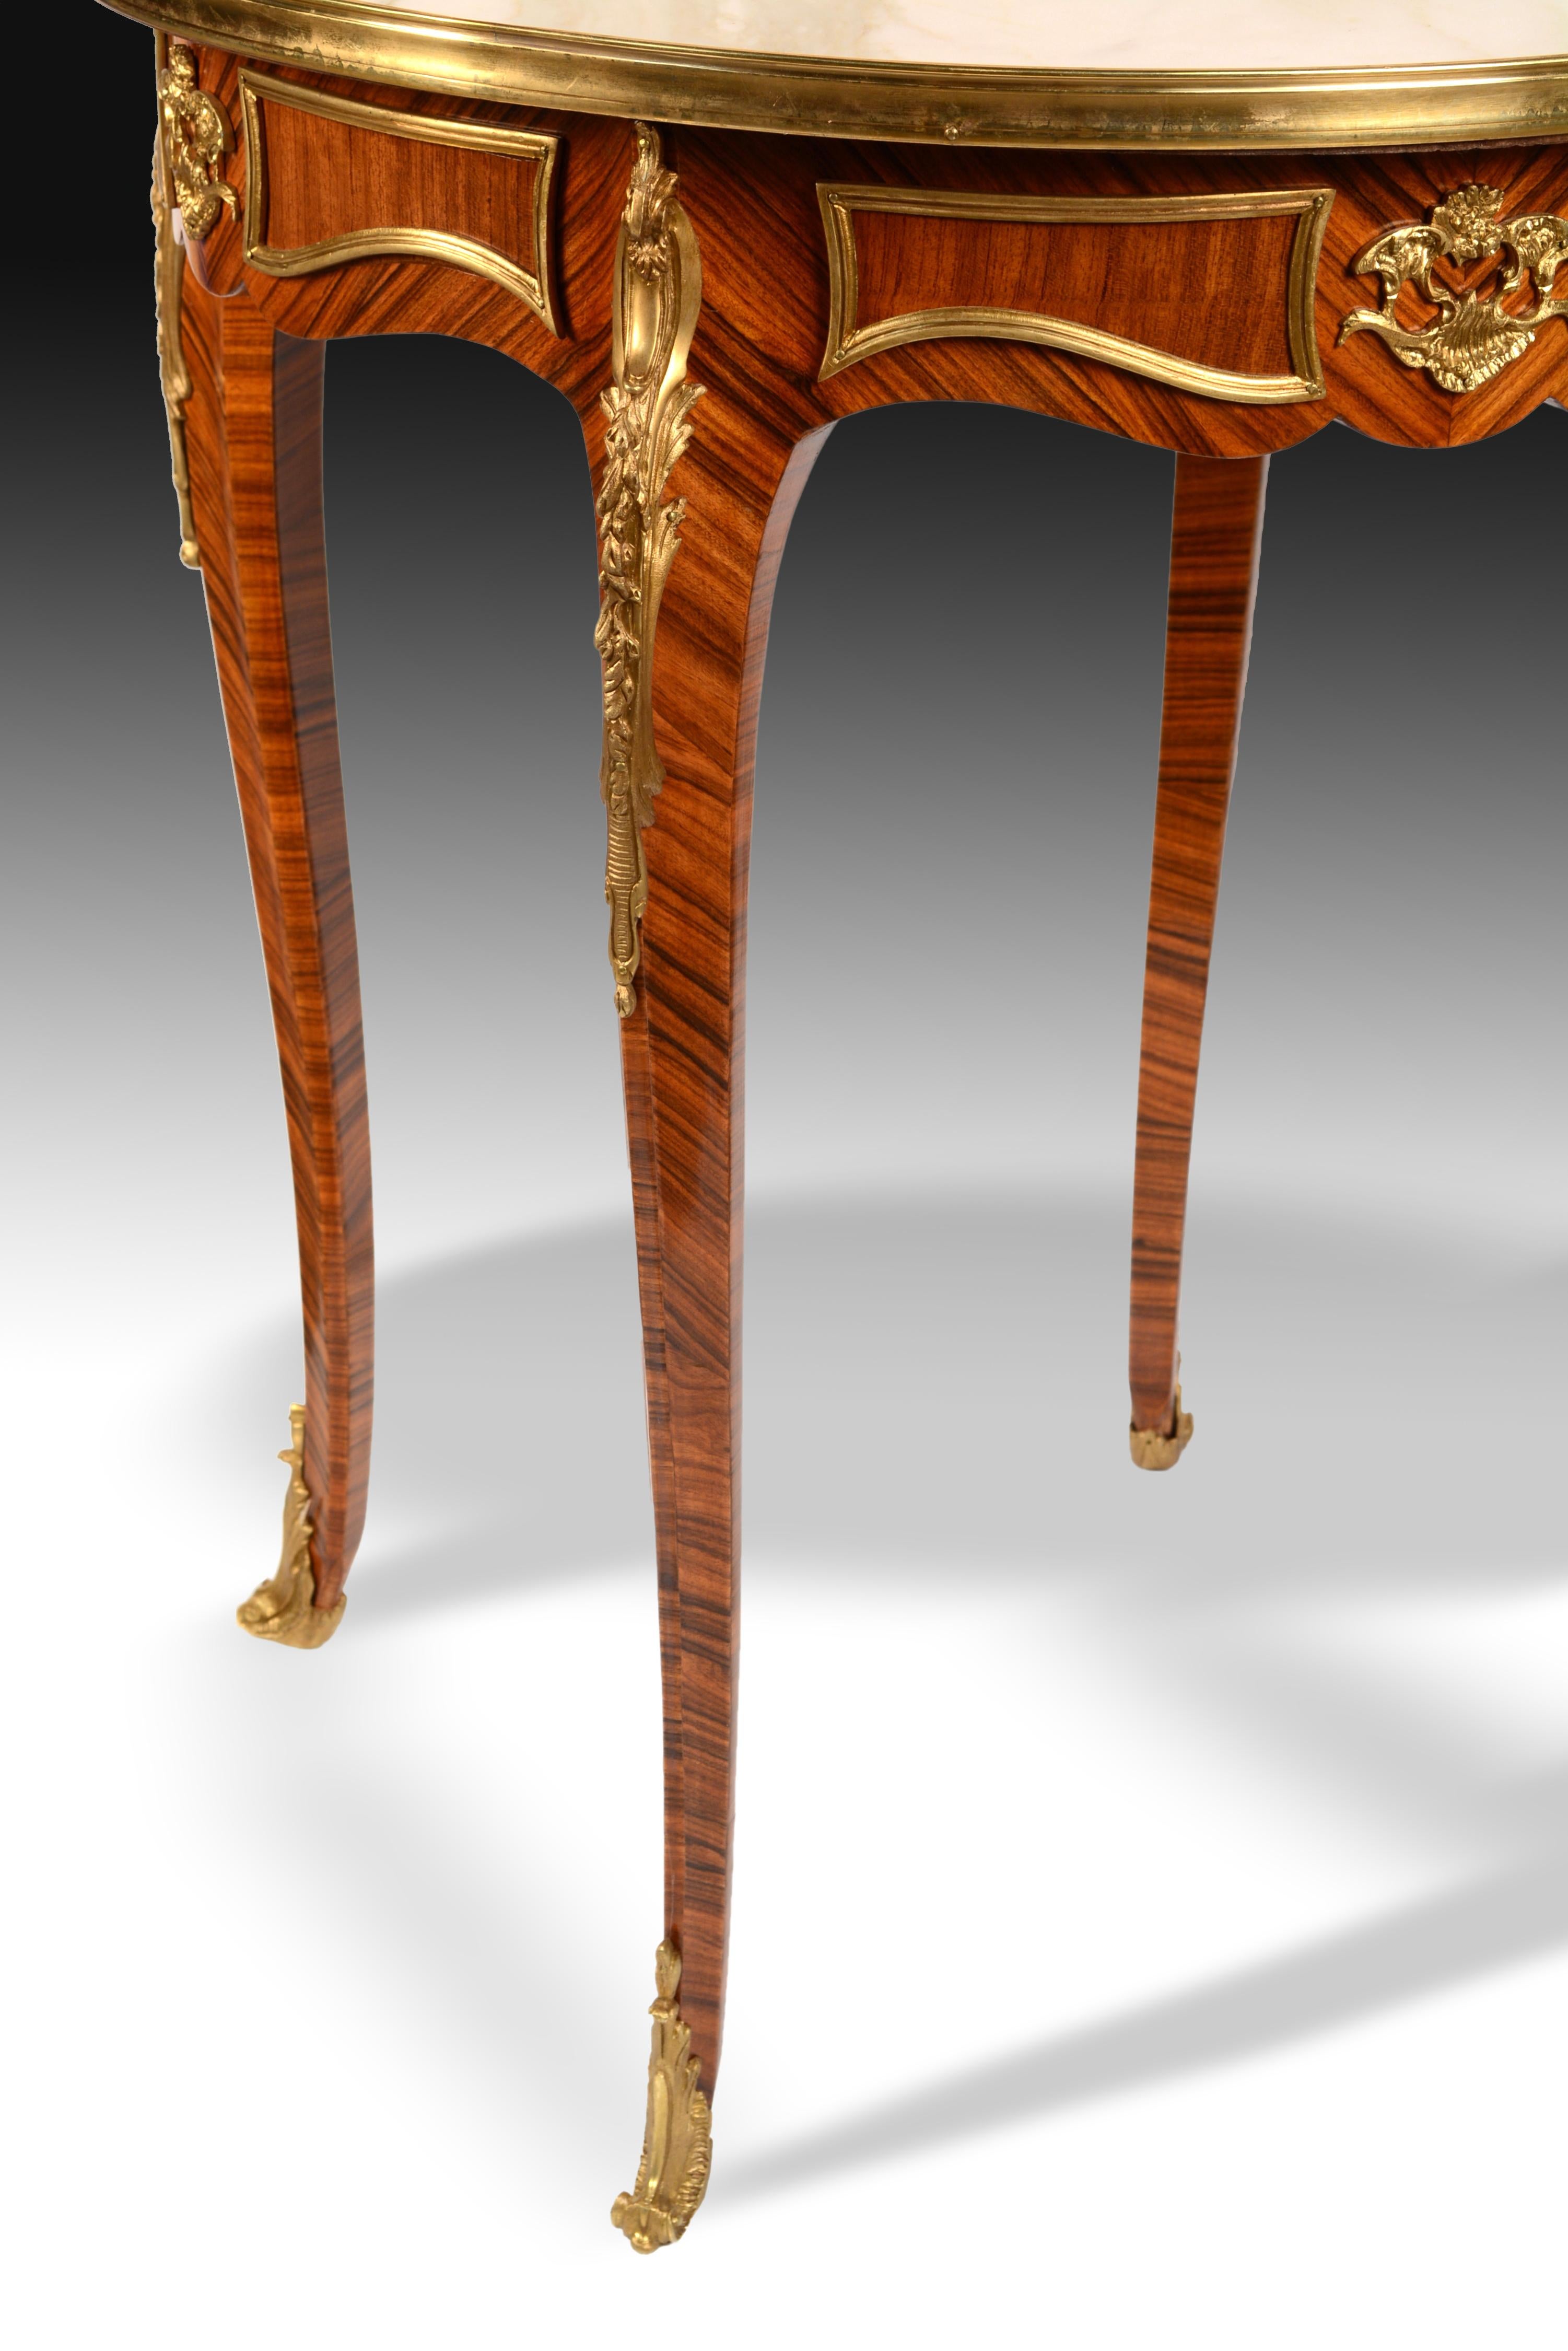 The four cabriolet legs are joined with the waist without visual separation to highlight the wood of rosewood, which has also been used in plates on the fronts of the table changing the arrangement of the veins. The decorations in gilded metal